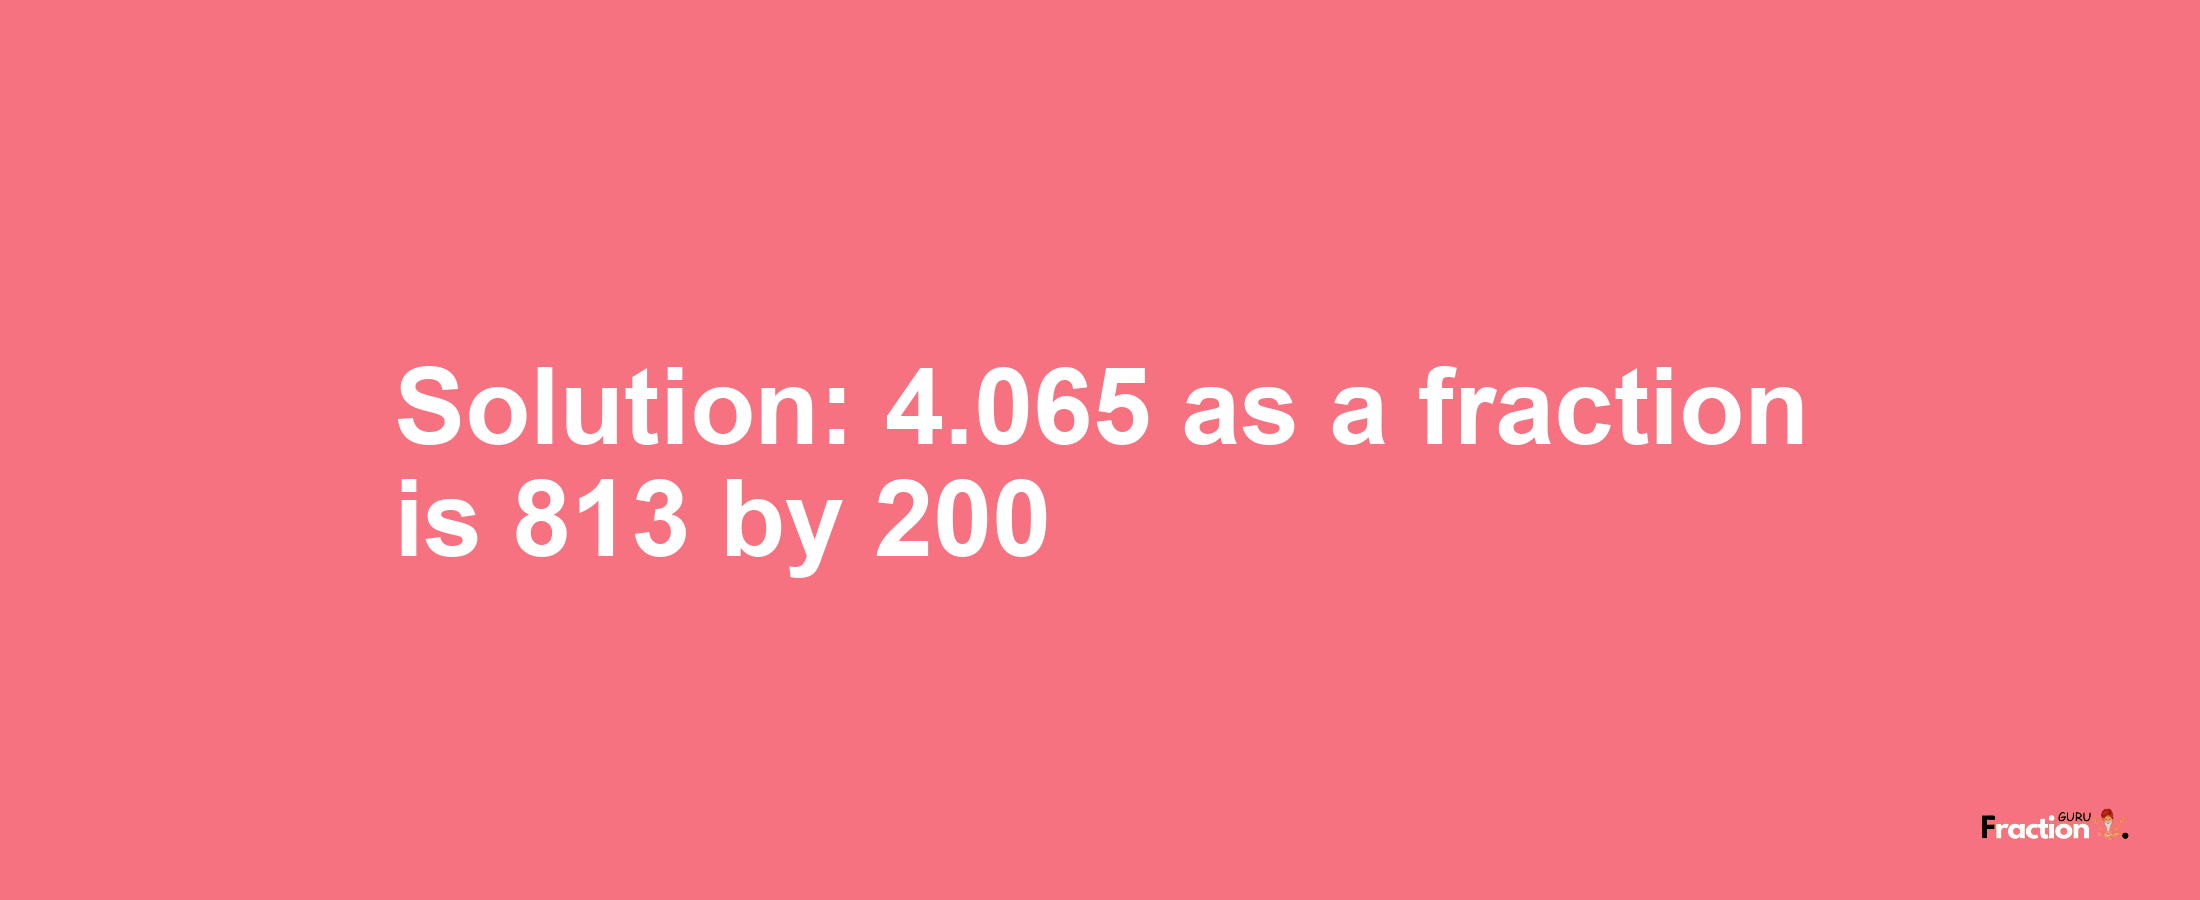 Solution:4.065 as a fraction is 813/200